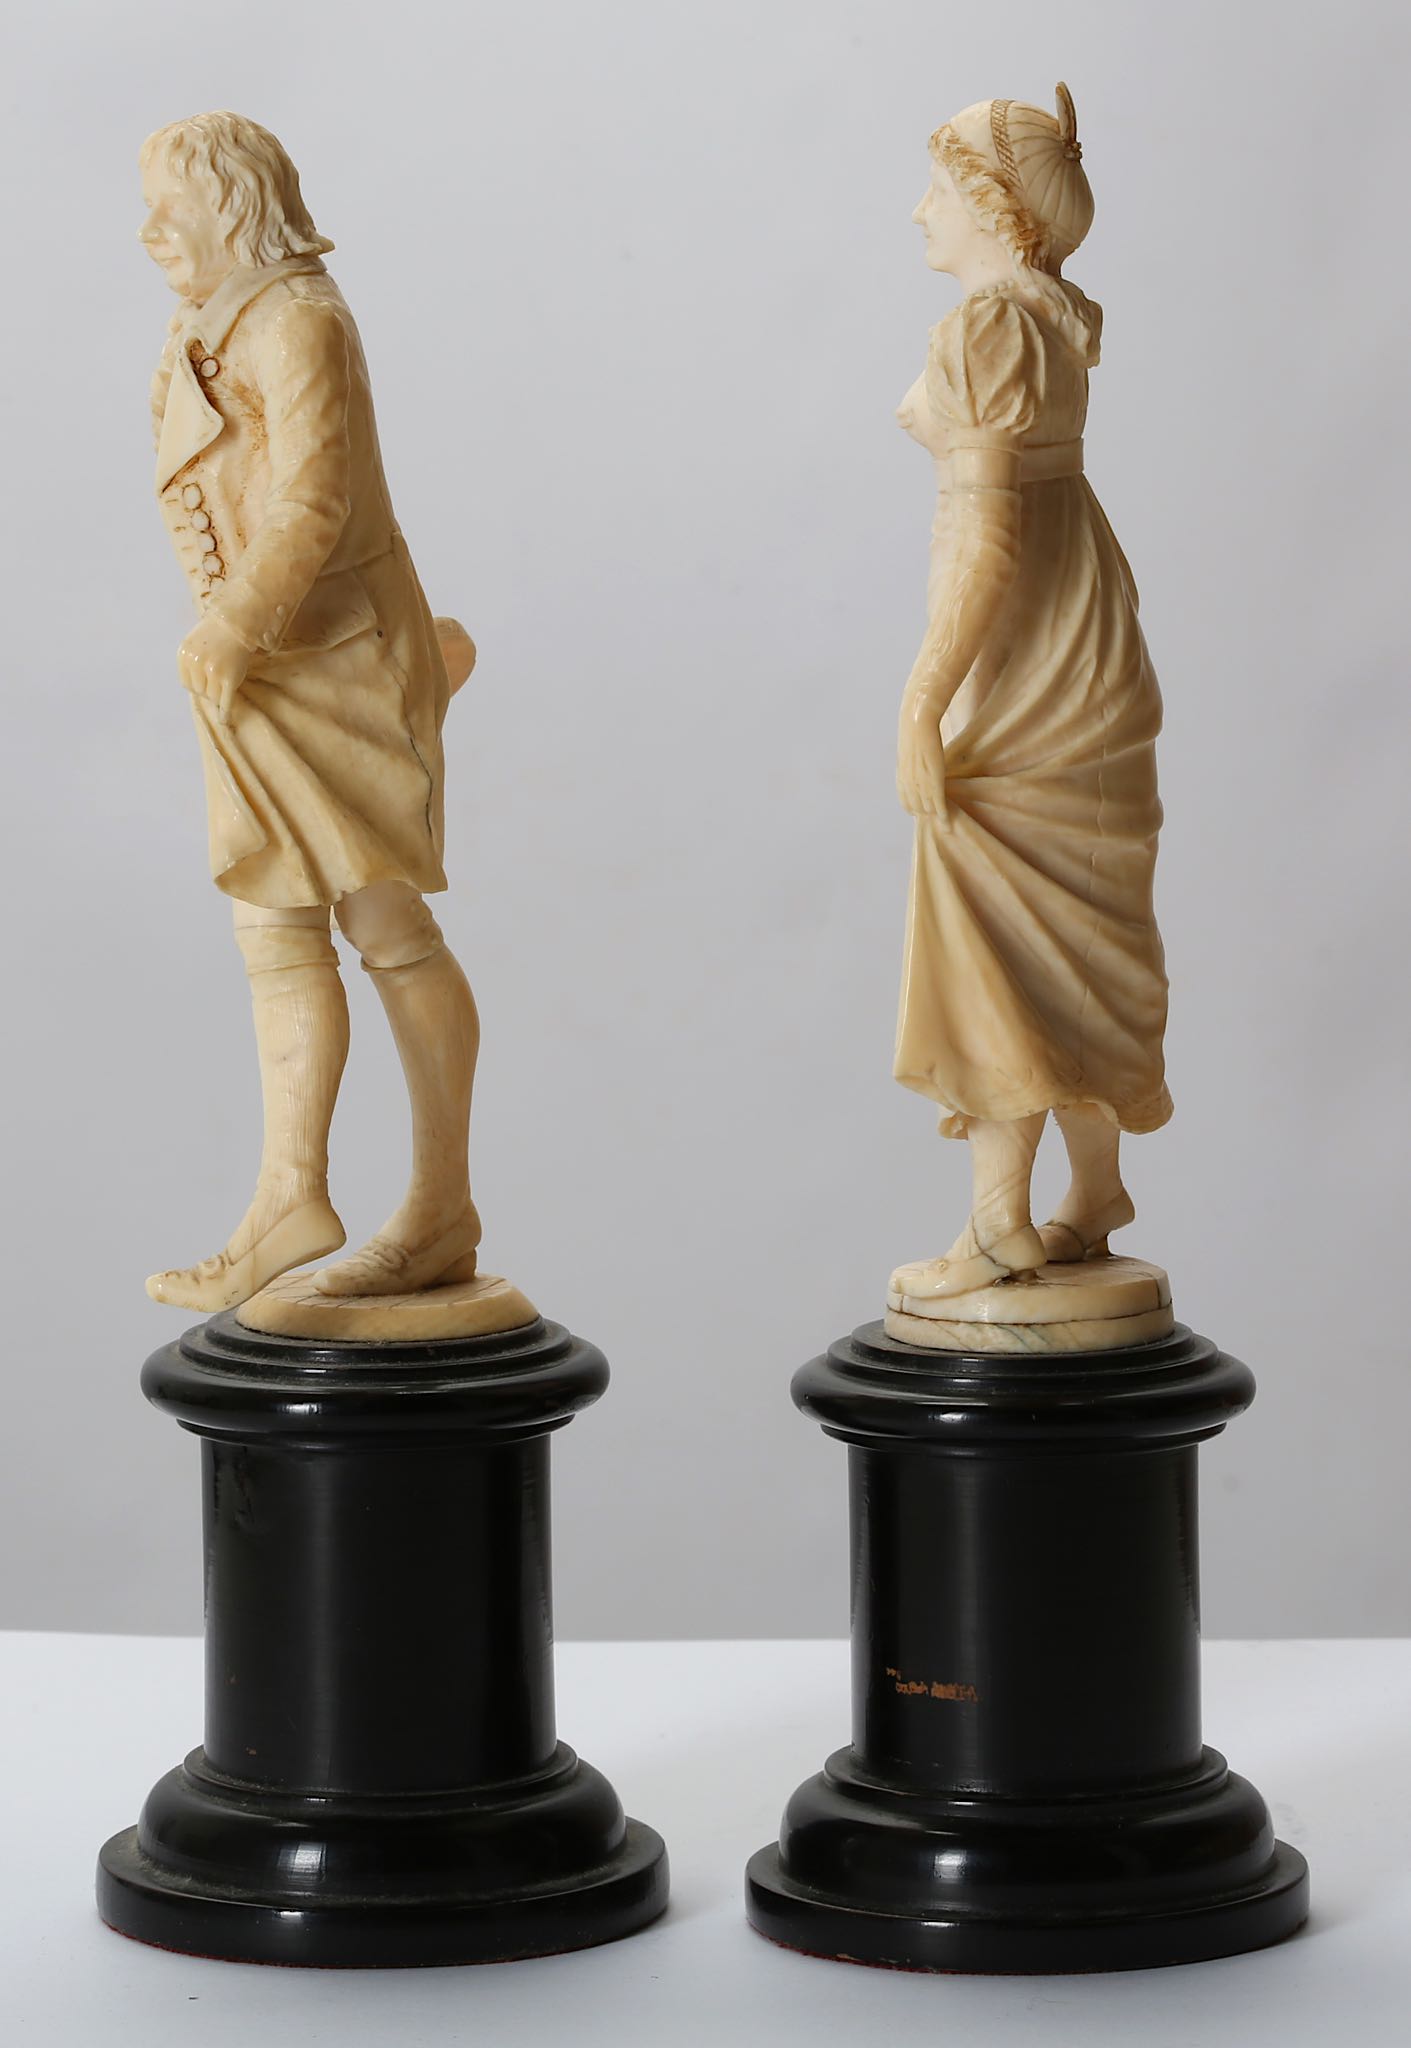 A PAIR OF EARLY 19TH CENTURY FRENCH (DIEPPE) IVORY FIGURES OF A LADY AND GENTLEMAN DANCING the - Image 2 of 7